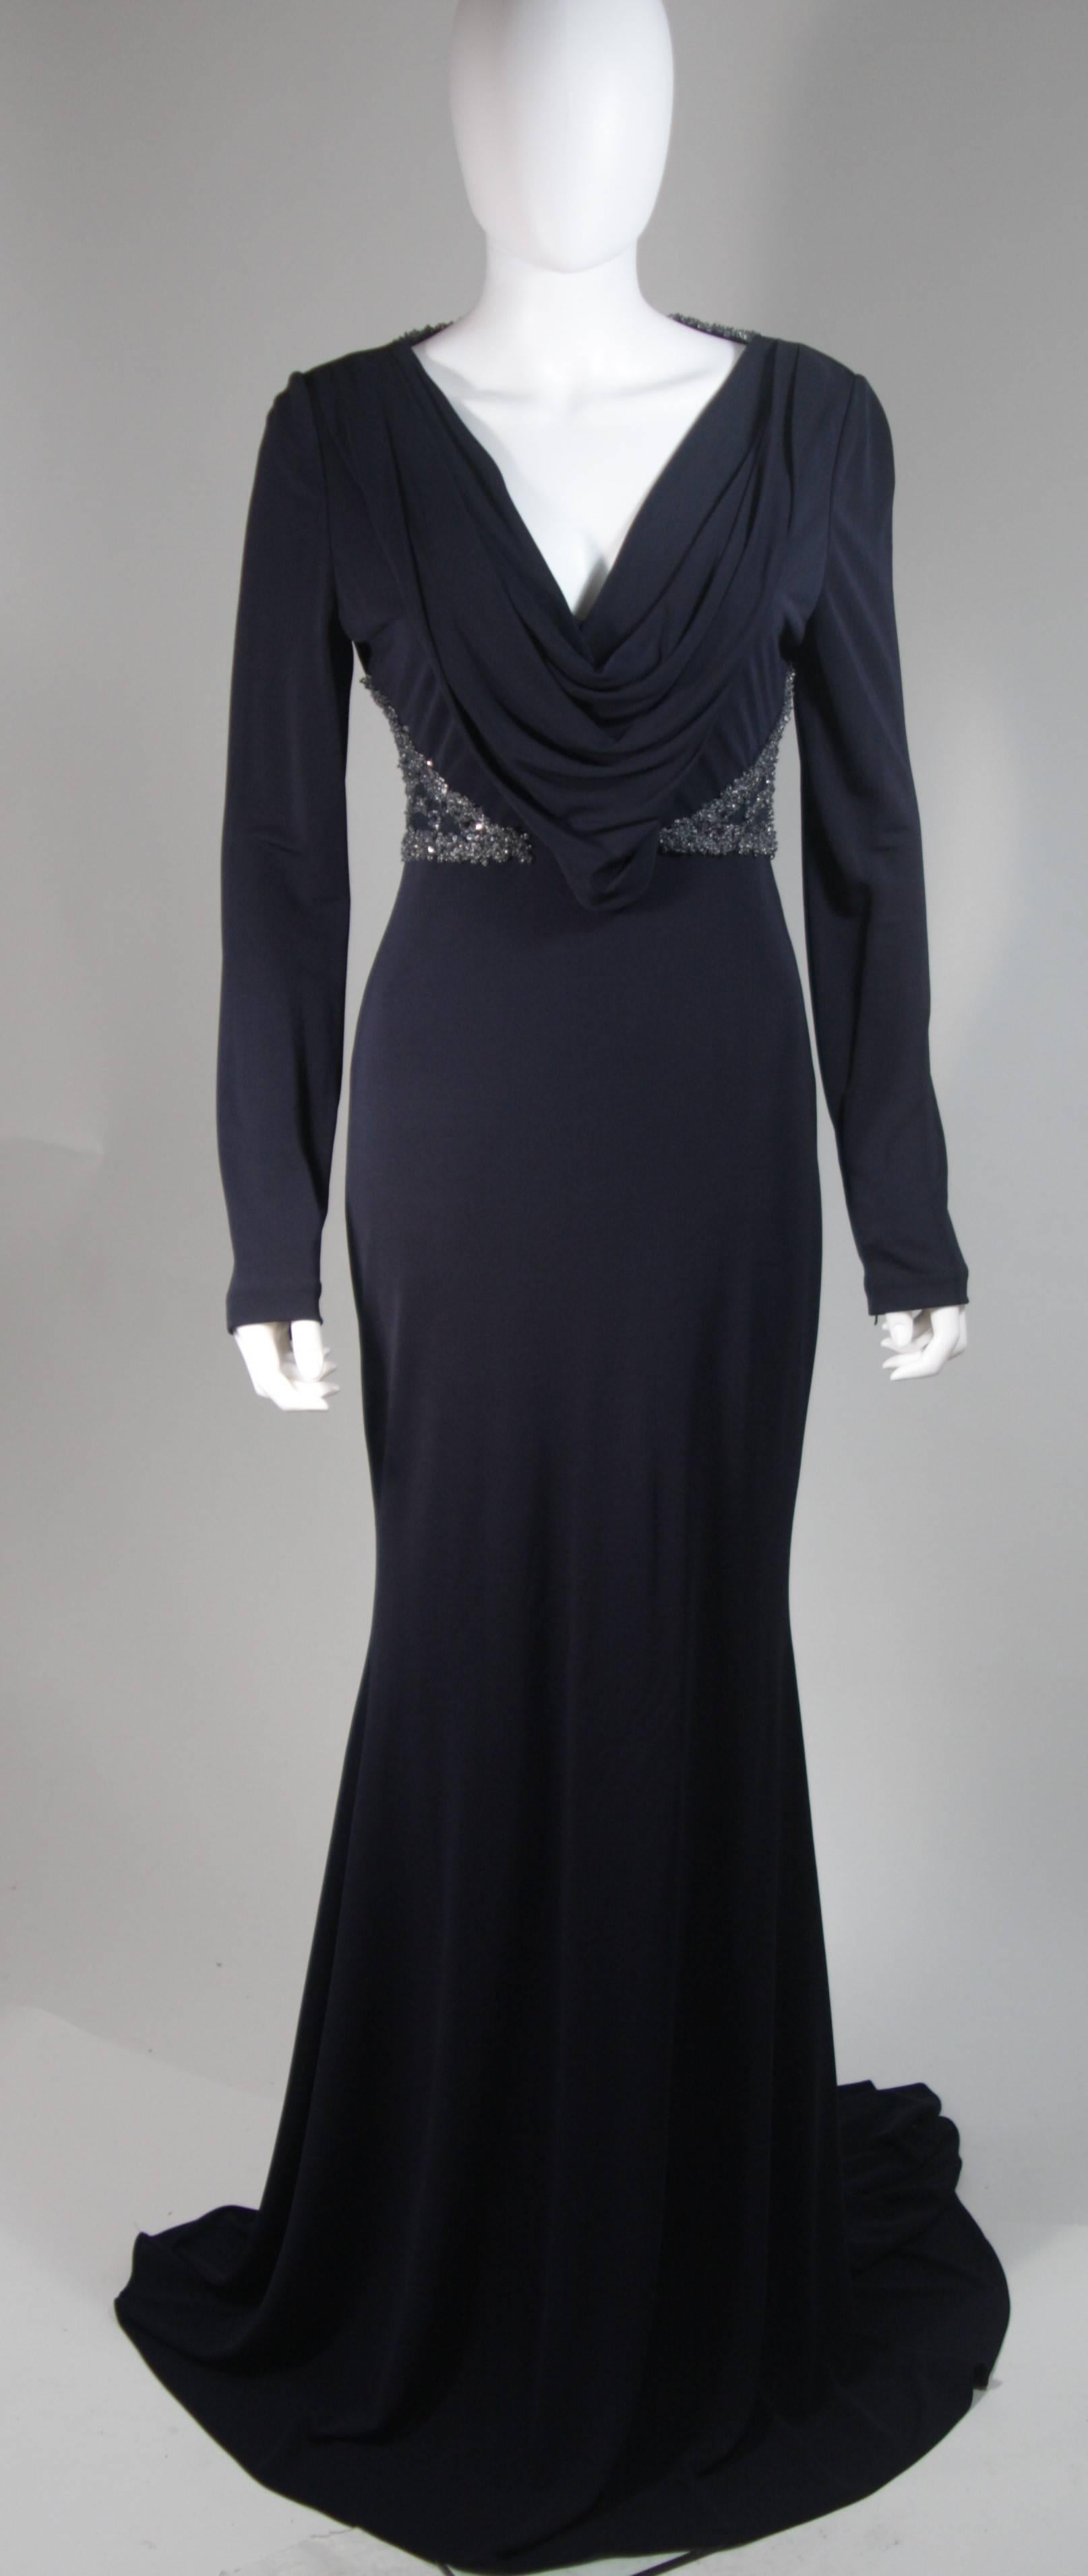 This Badgley Mischka design is available for viewing at our Beverly Hills Boutique. We offer a large selection of evening gowns and luxury garments. 

 This gown is composed of a navy jersey and features side embellishments/beading. The classic